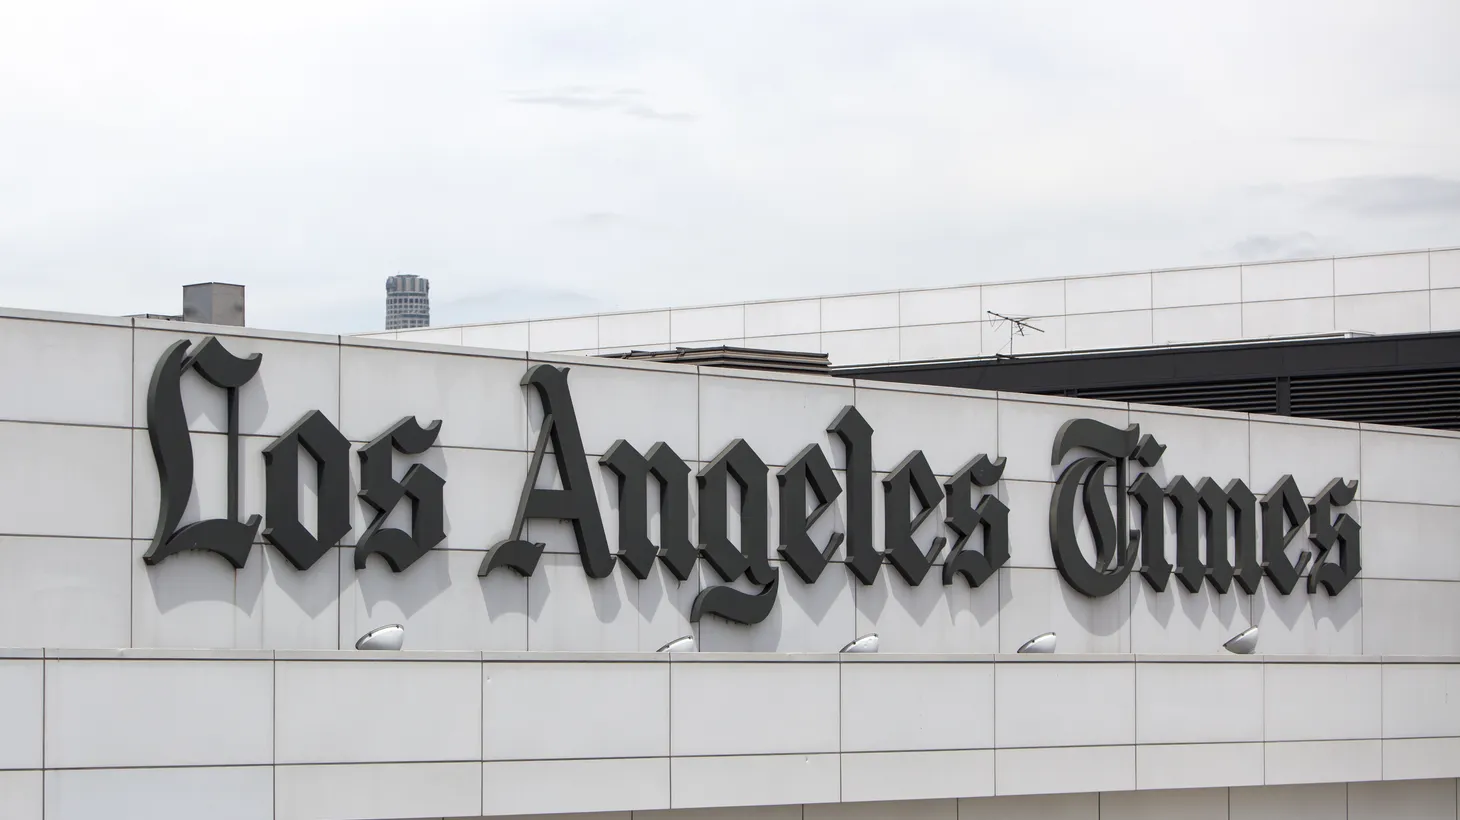 LA Times management has identified 74 newsroom positions it plans to cut due to budgetary issues.